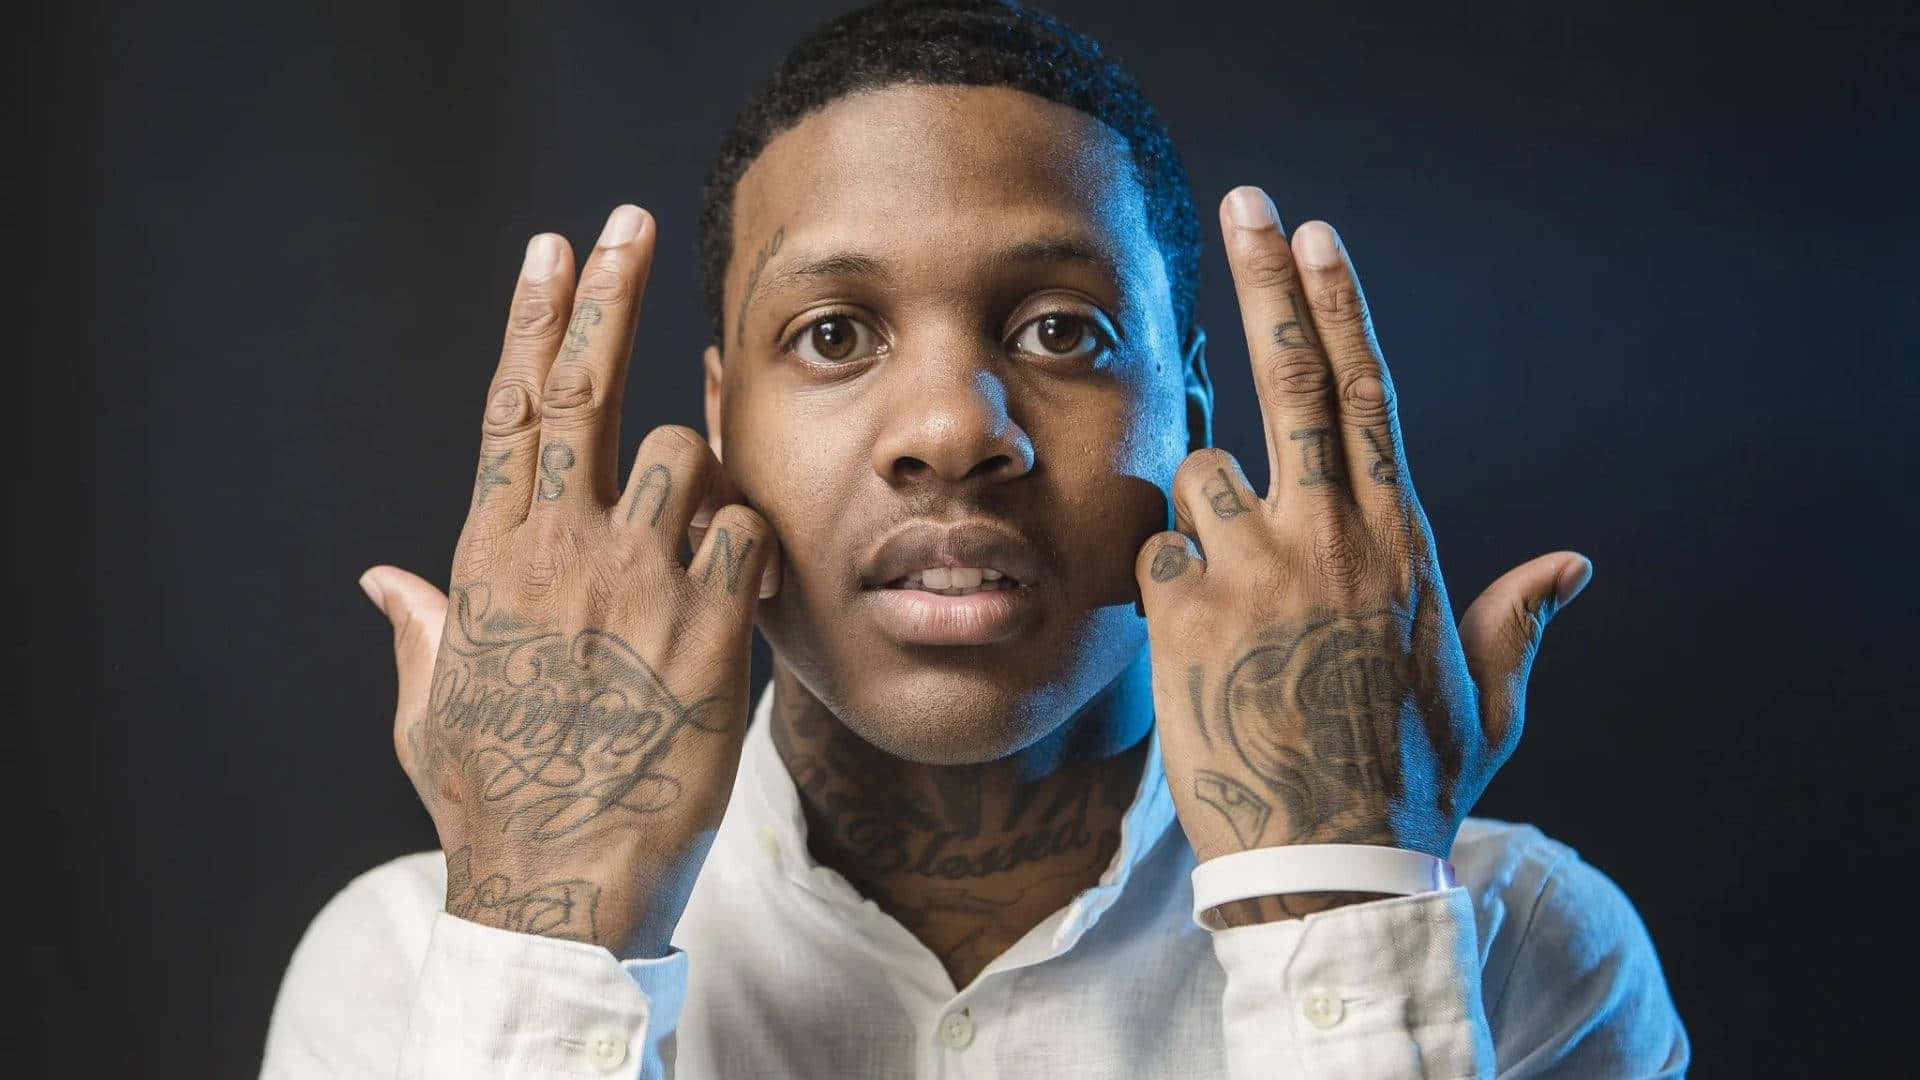 Lil Durk posing in a stylish outfit on a city rooftop